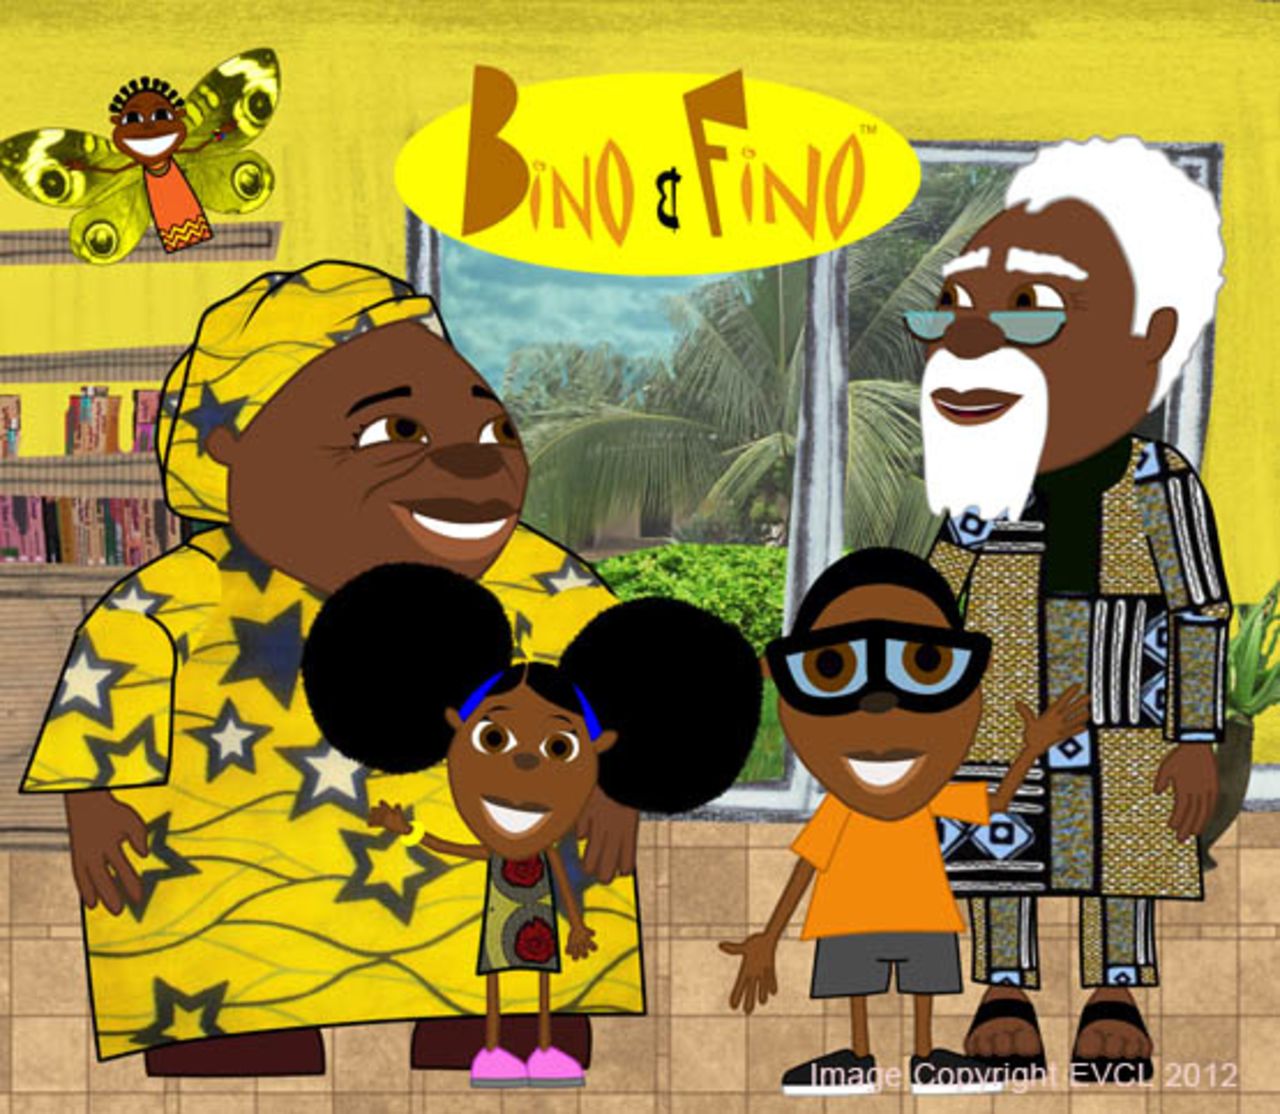 The cartoon aims to teach children about African history, languages and culture.